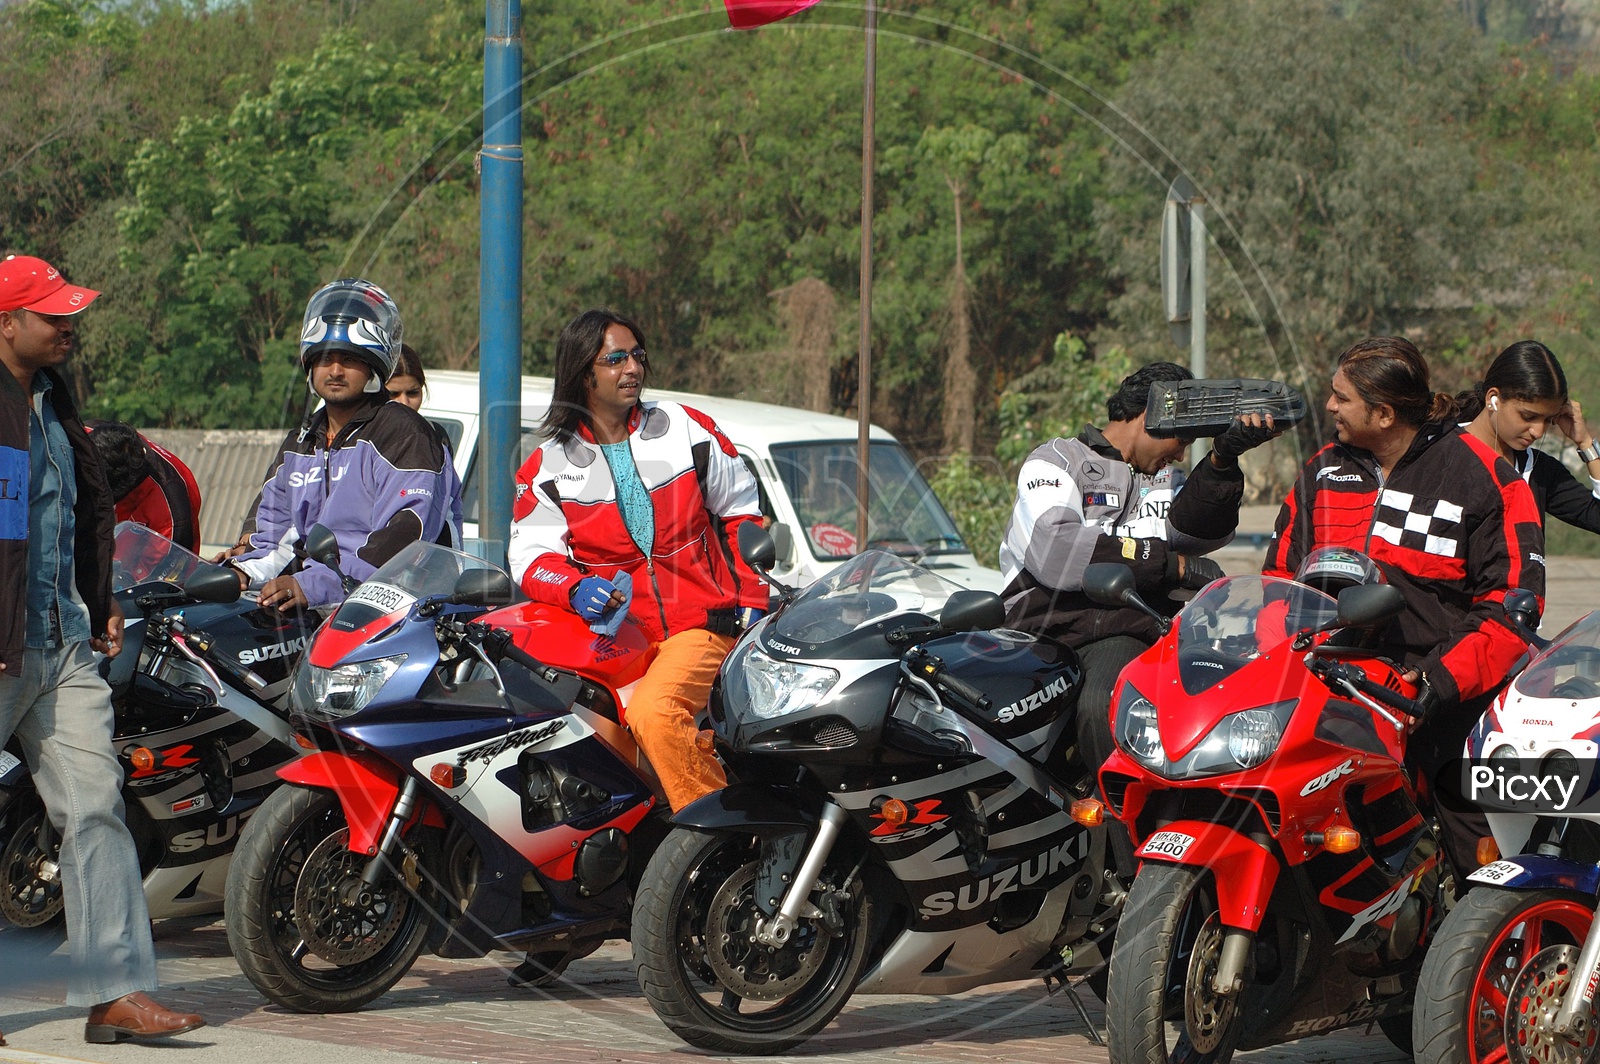 Bikers Ride At The Goa Carnival